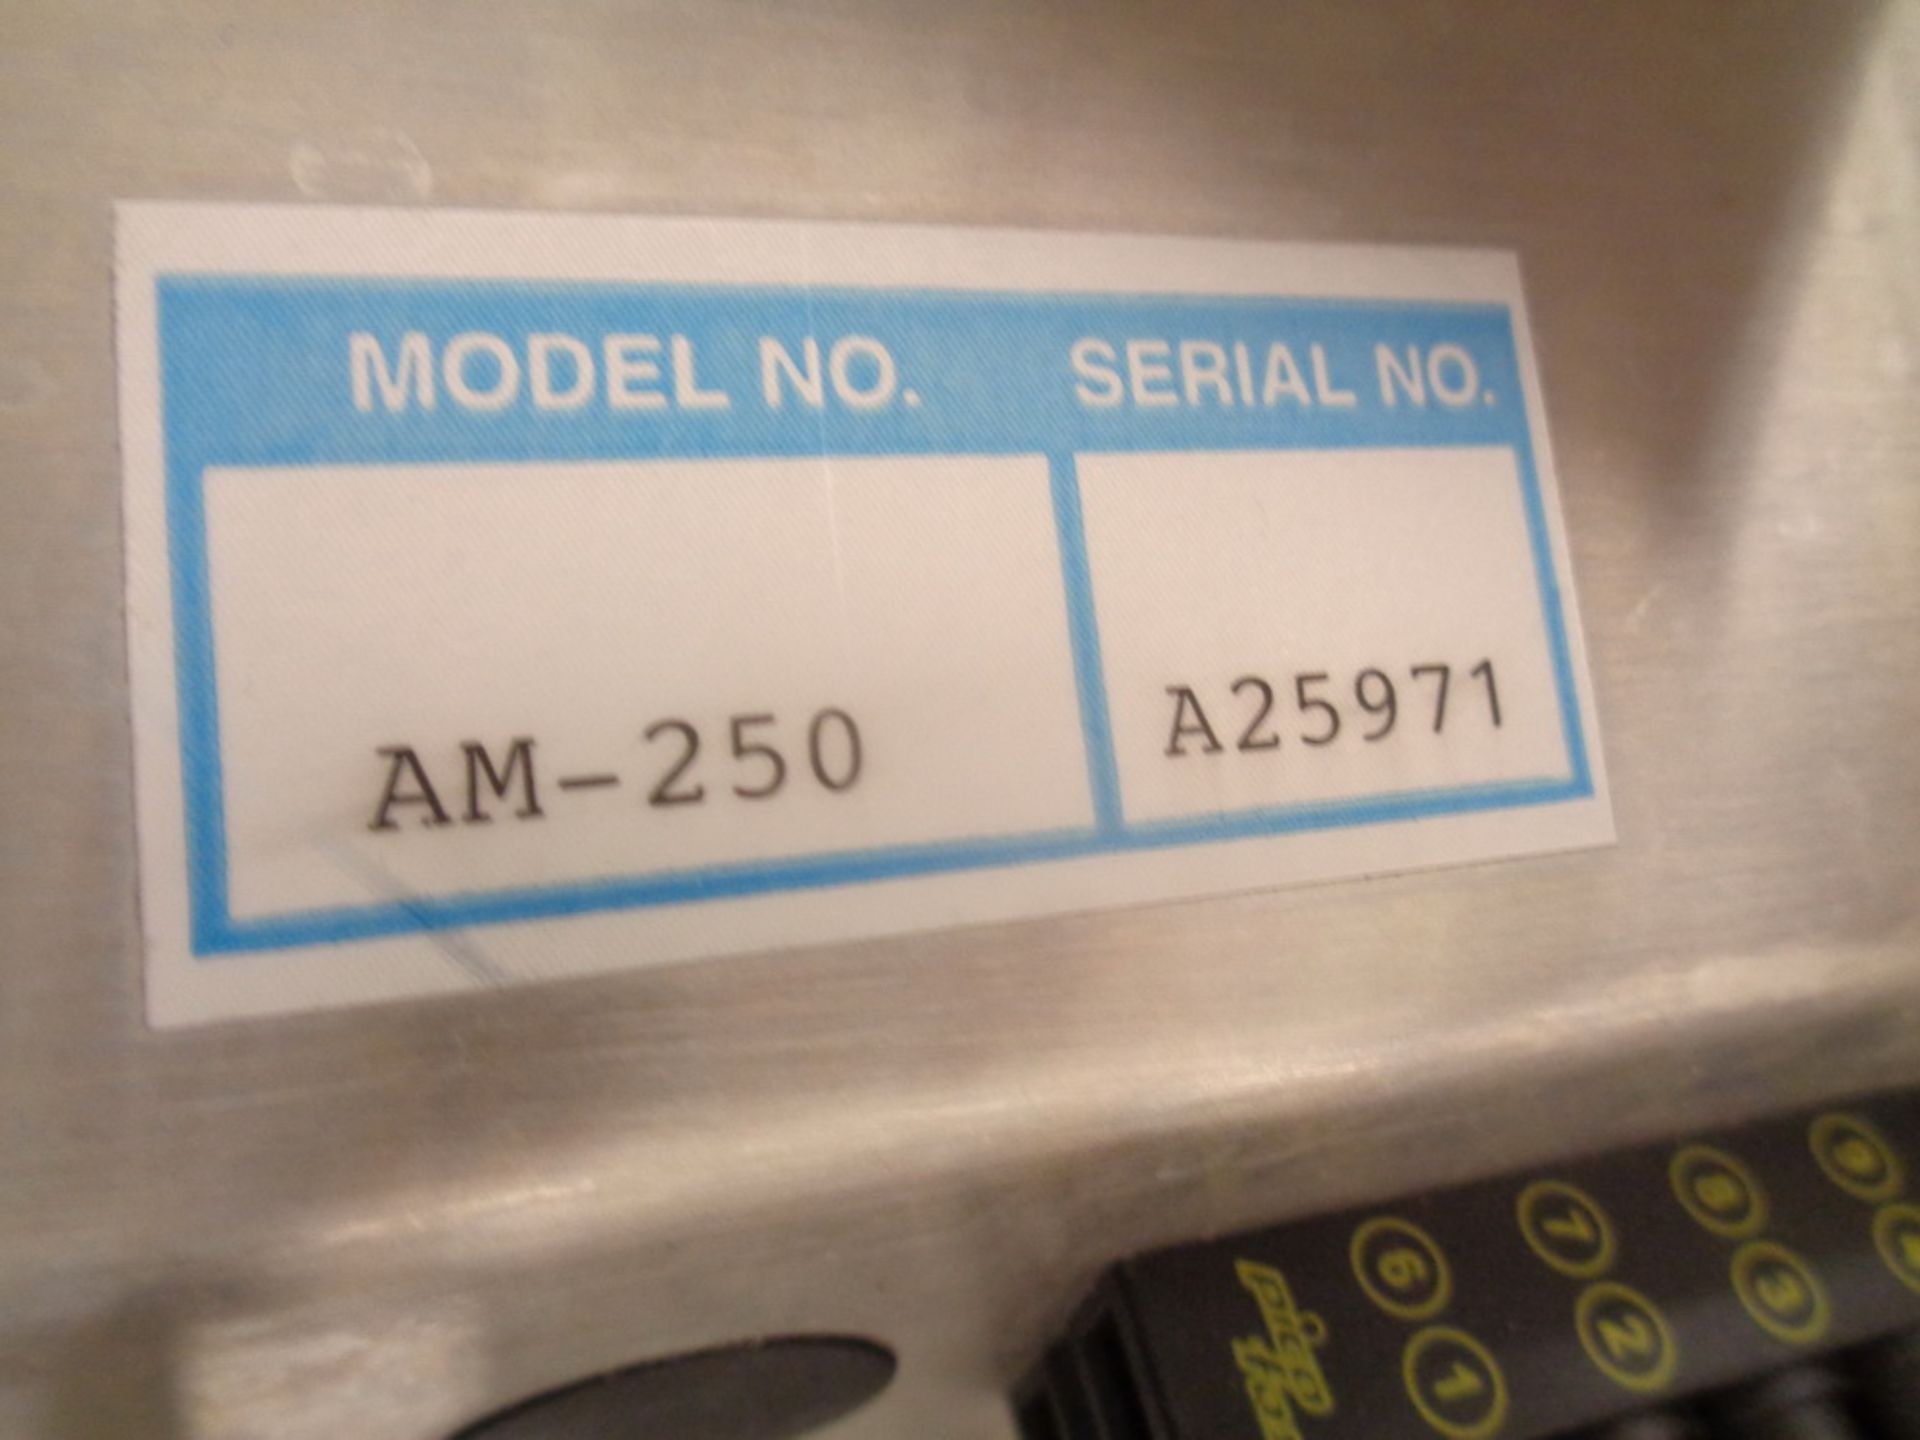 AUTOMATE INDUCTION CAP SEALER, MODEL AM-250, SERIAL NUMBER A25971, SEE AUCTIONEER NOTE - Image 5 of 8